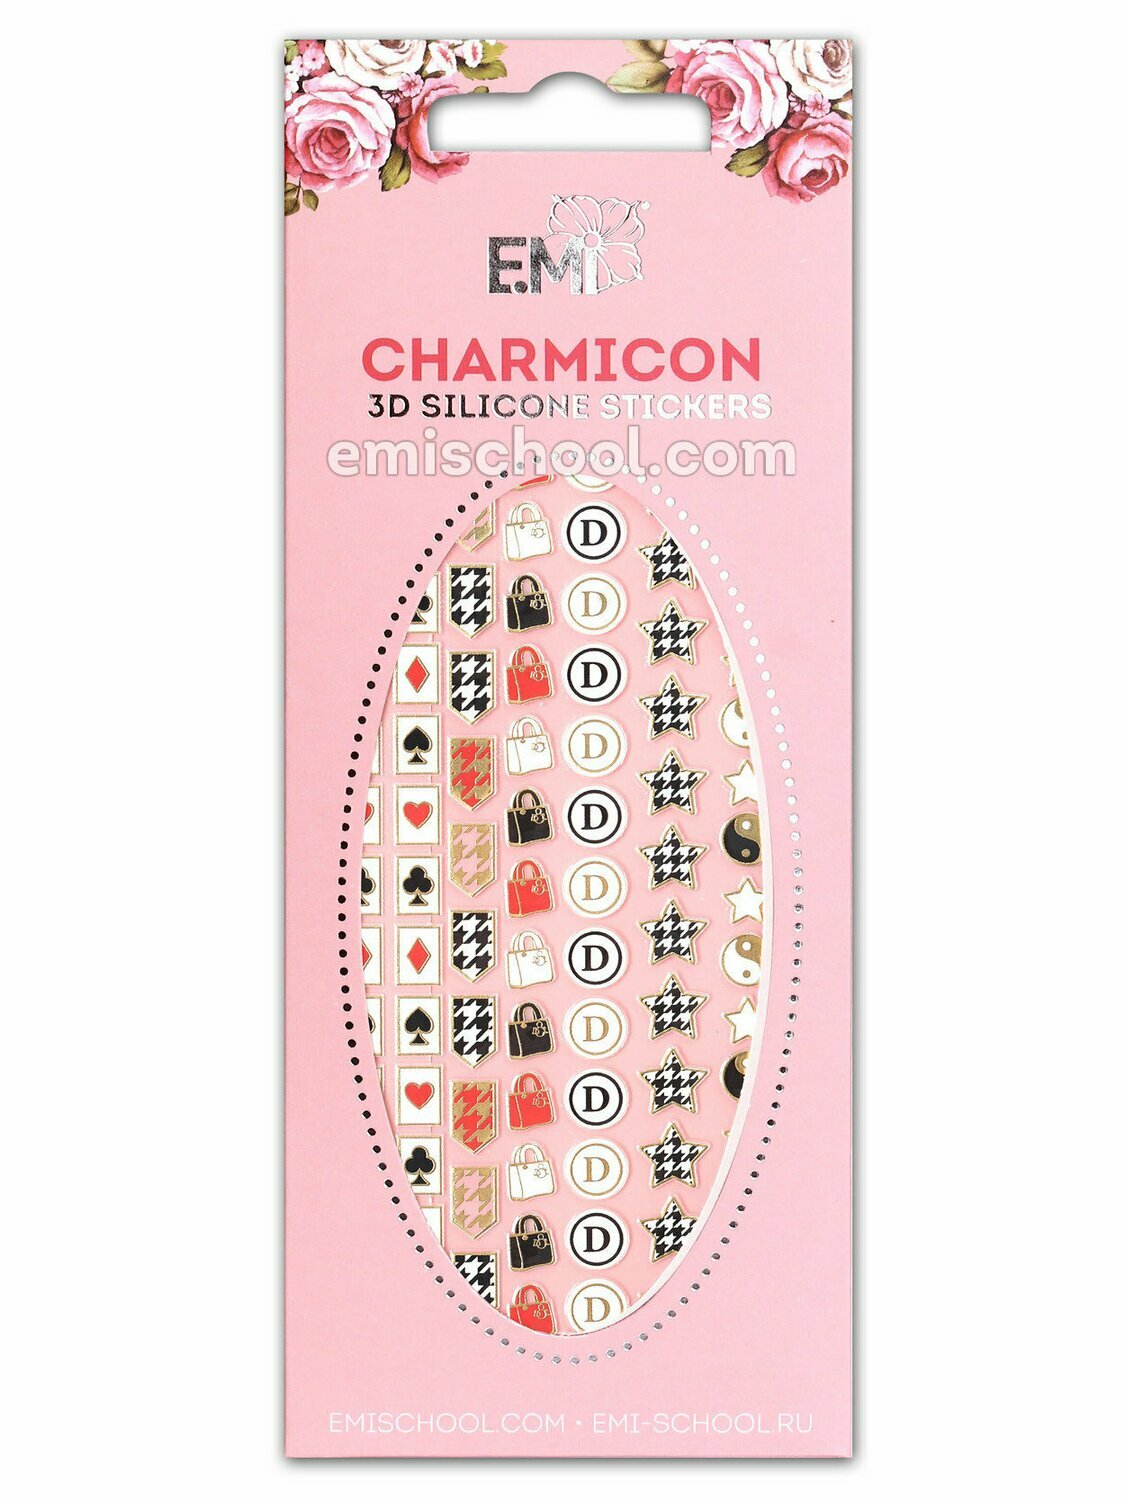 Charmicon 3D Silicone Stickers #57 Icons